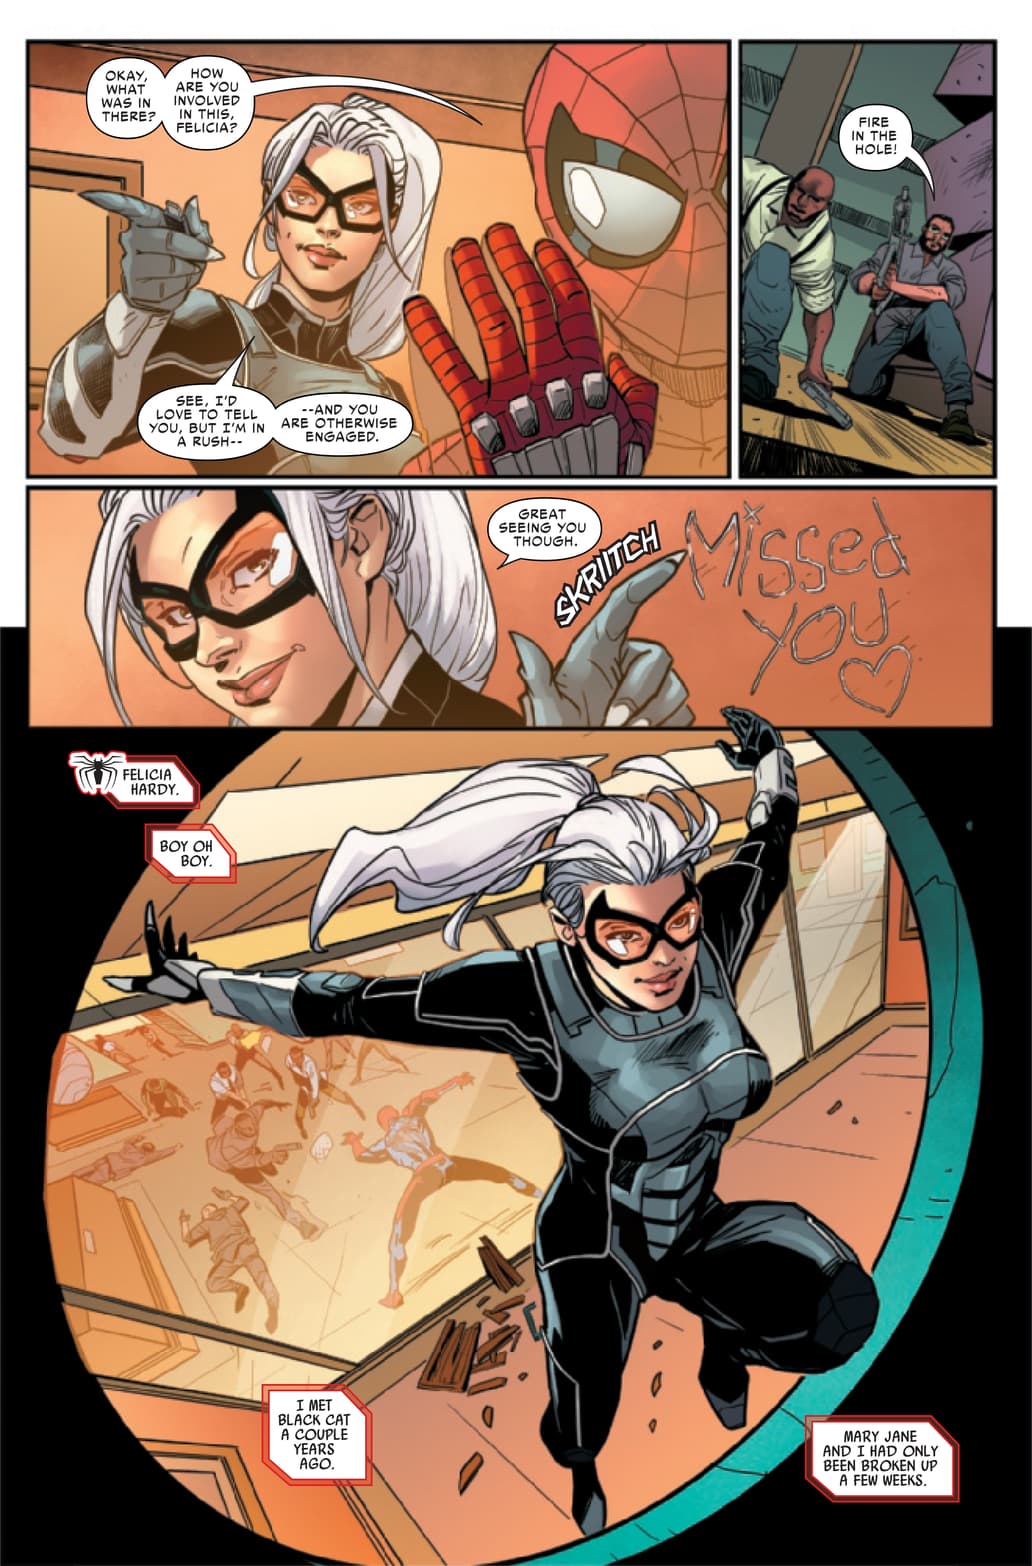 MARVEL'S SPIDER-MAN: THE BLACK CAT STRIKES #1 Preview — Art by Luca Maresca